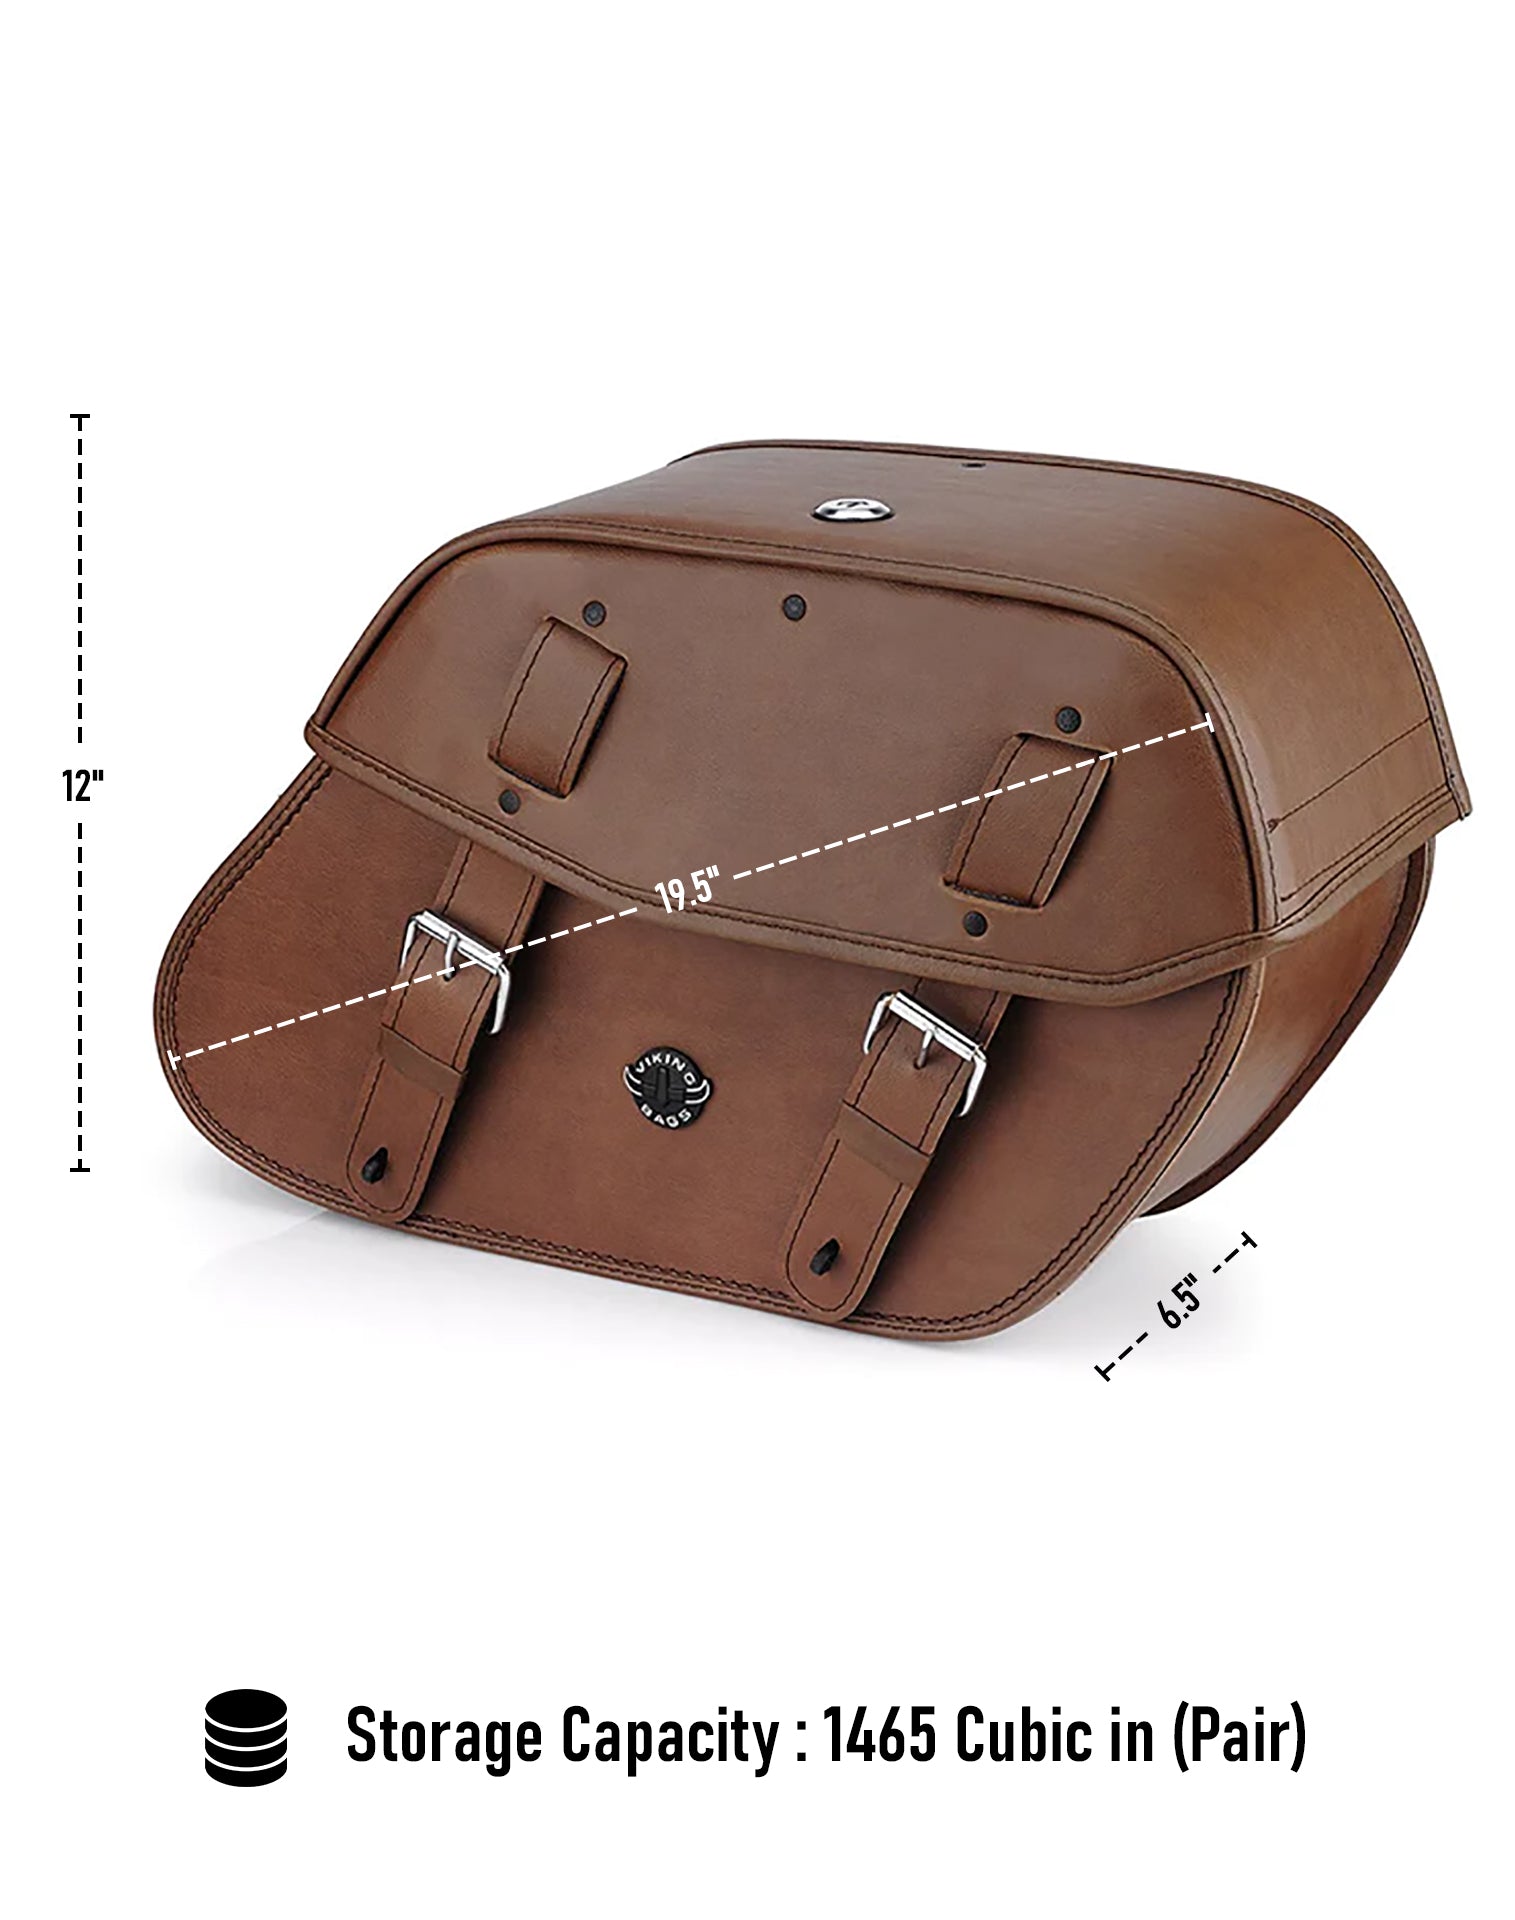 Viking Odin Brown Large Leather Motorcycle Saddlebags For Harley Softail Street Bob Fxbb Can Store Your Ridings Gears